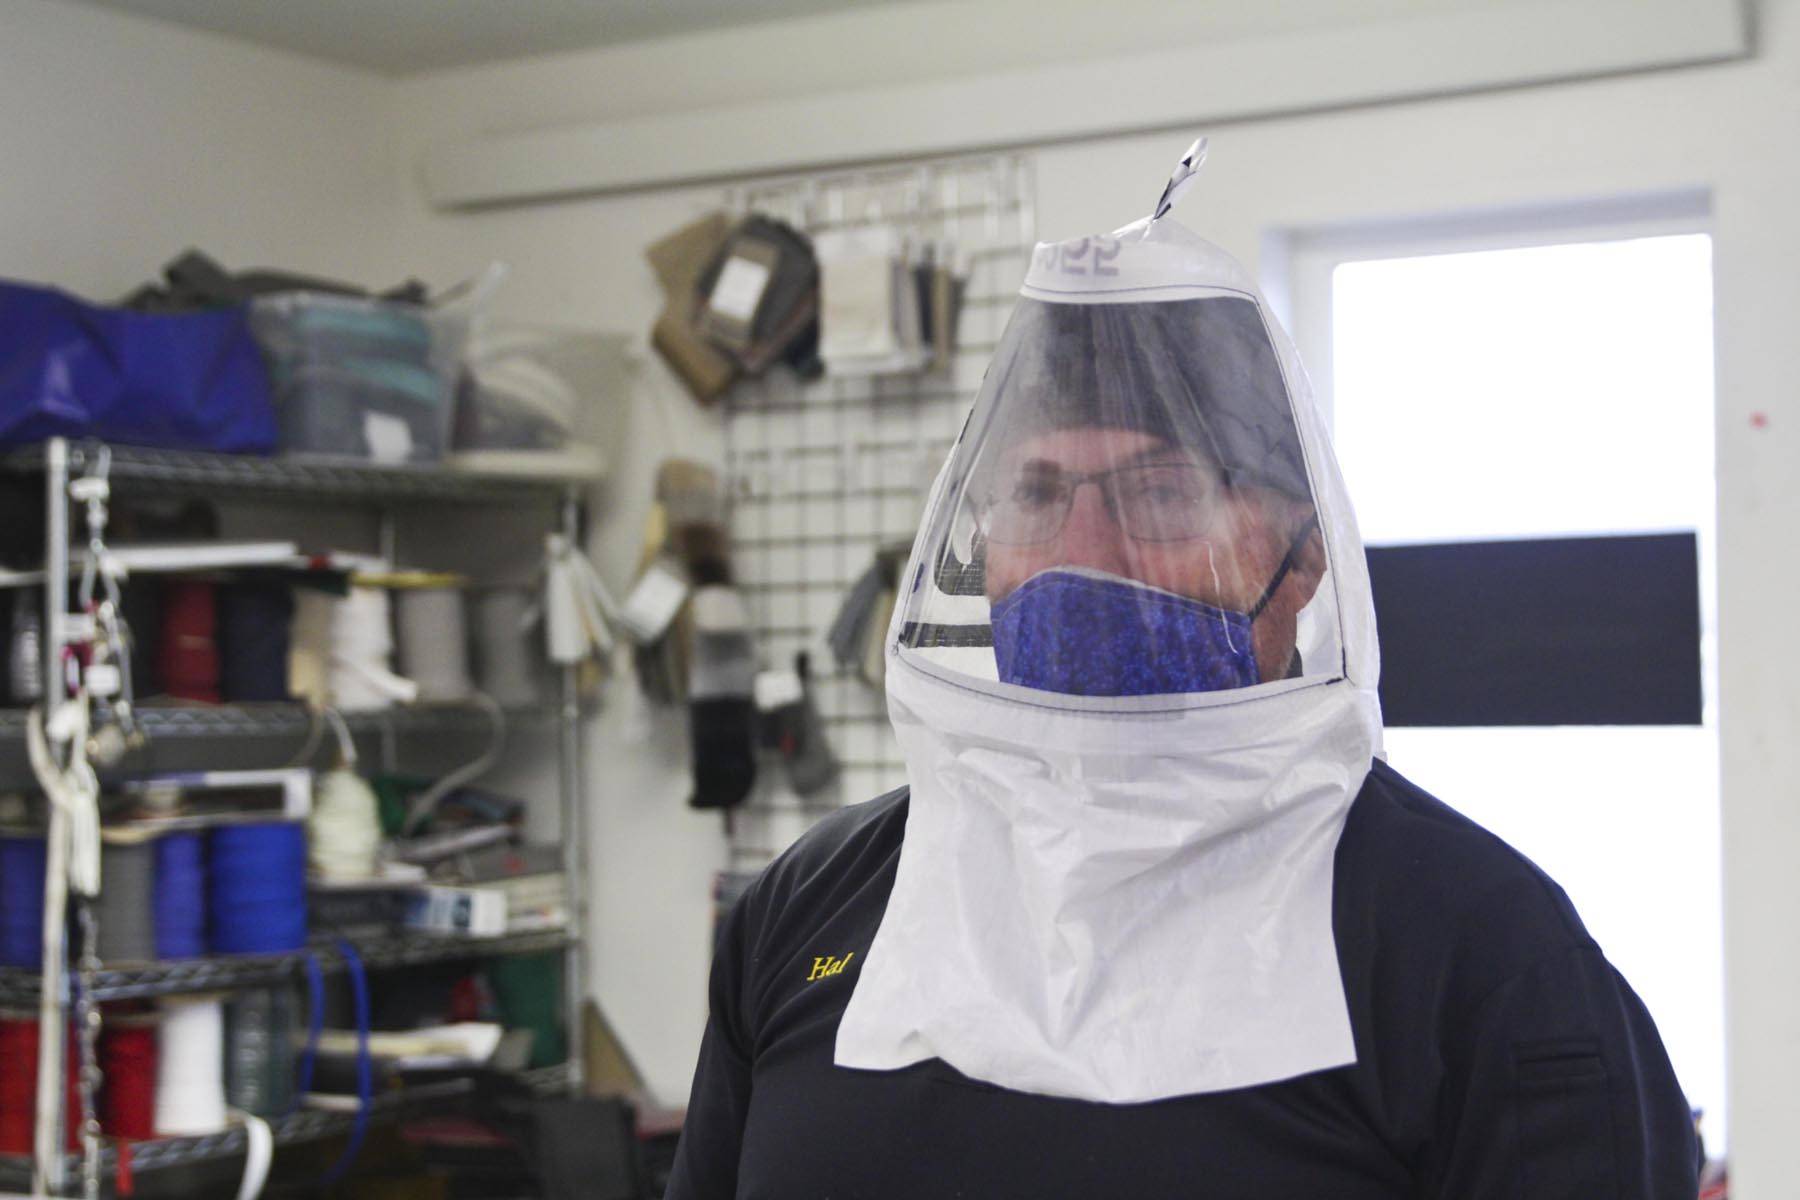 Hal Daugherty shows off his hood design, to be put into production at his all-volunteer Southeast Regional Personal Protective Equipment Fabrication Facility, stood up in his sterilized workspace at Capital Canvas, March 27, 2020. (Michael S. Lockett | Juneau Empire)